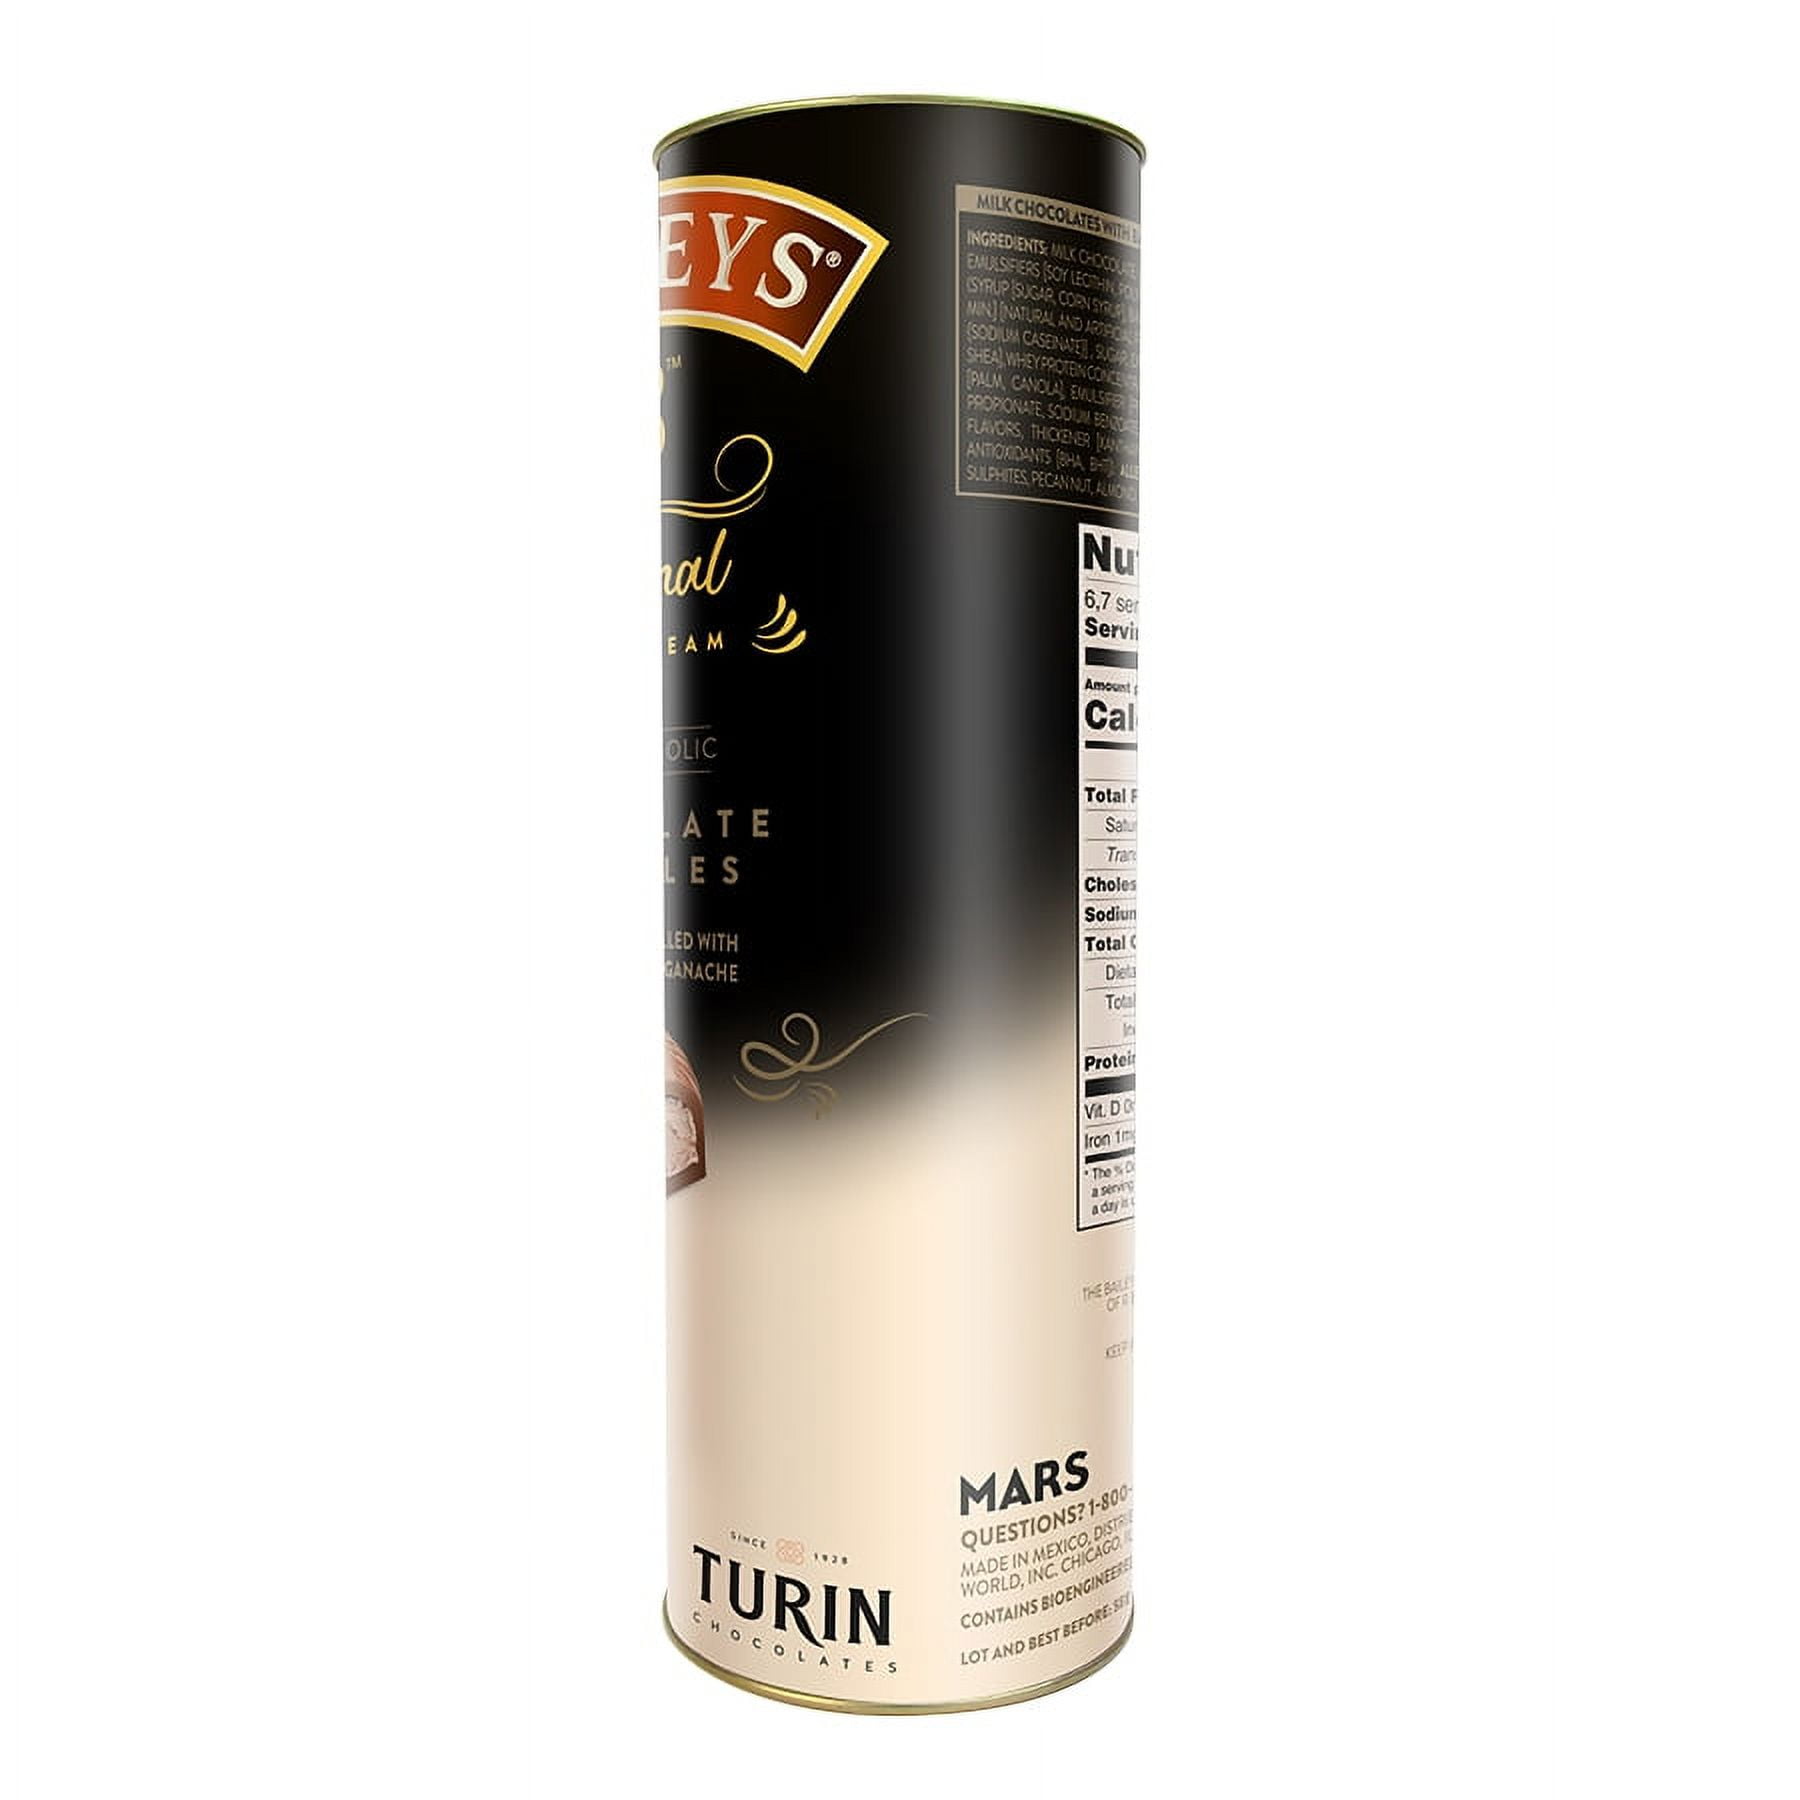  Turin Baileys Milk Chocolate Truffles, Milk Chocolates Filled  With Baileys Flavored Non-Alcoholic, 7oz Tube Great for Gifts and Treats :  Grocery & Gourmet Food